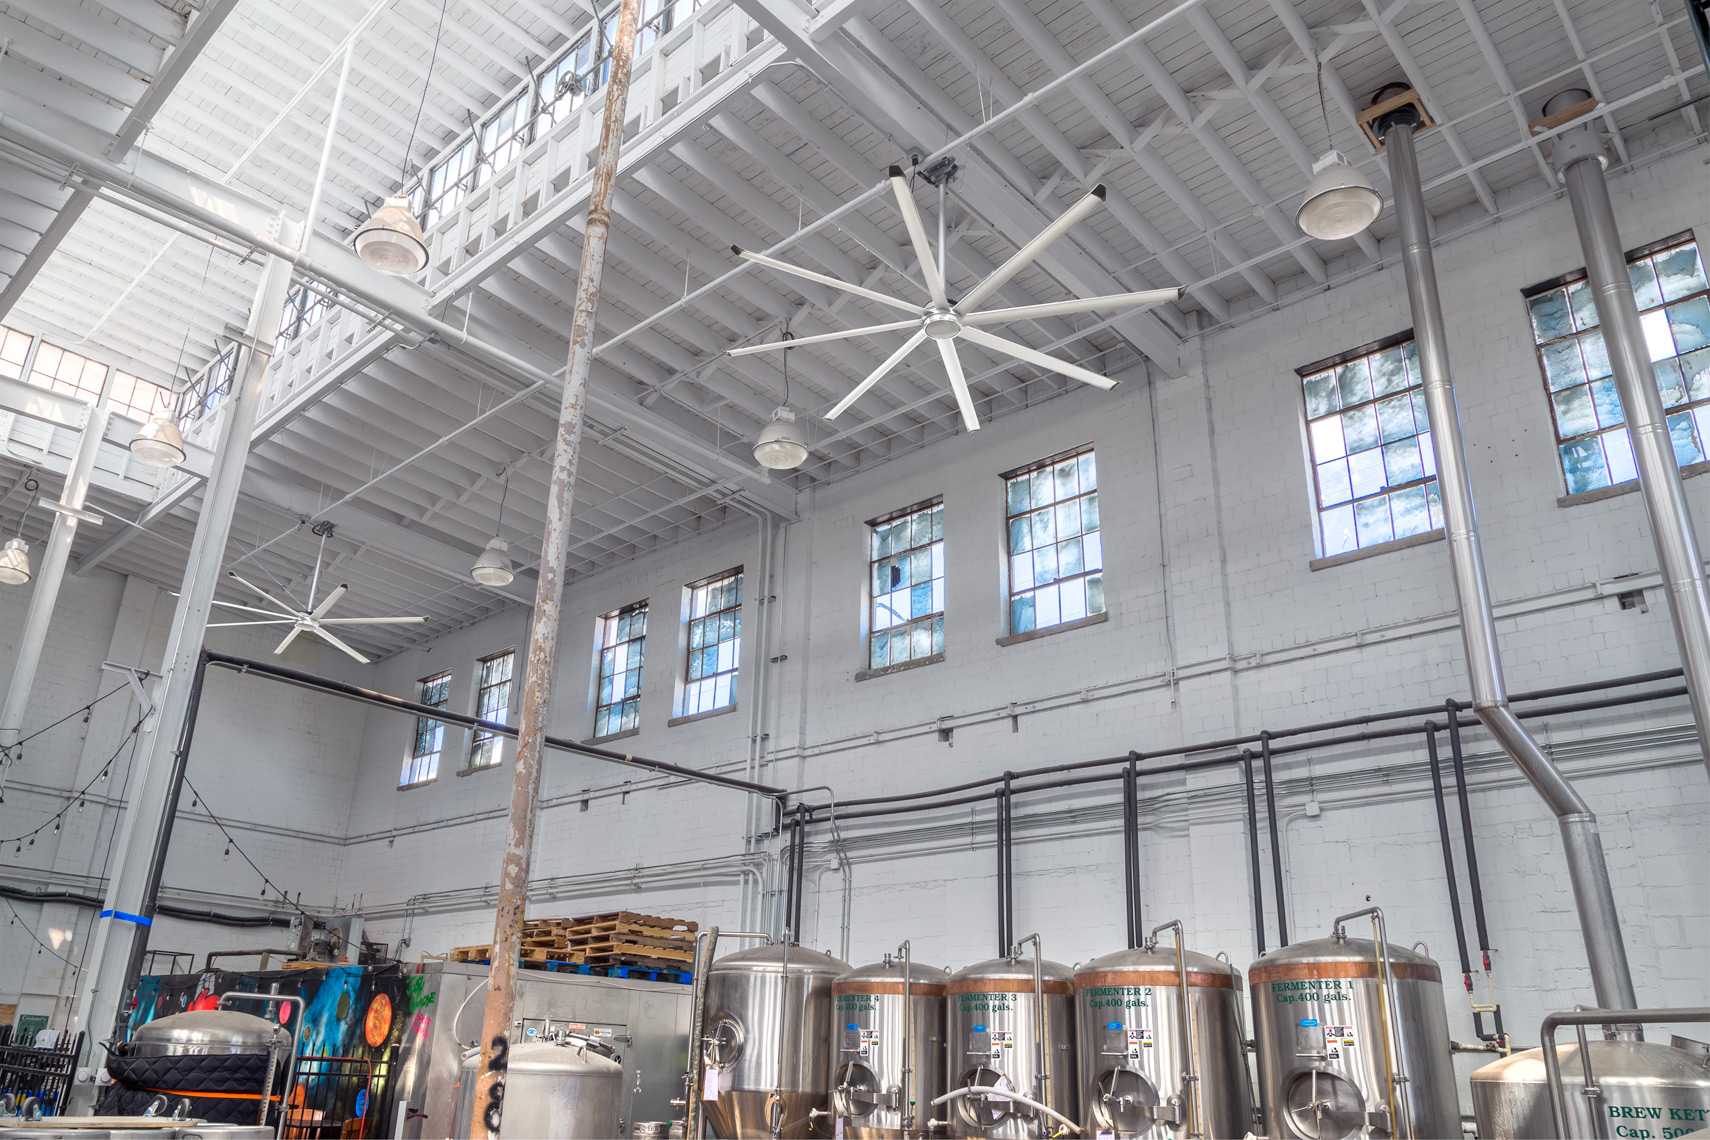 fan application for high bay at Ethereal Brewing